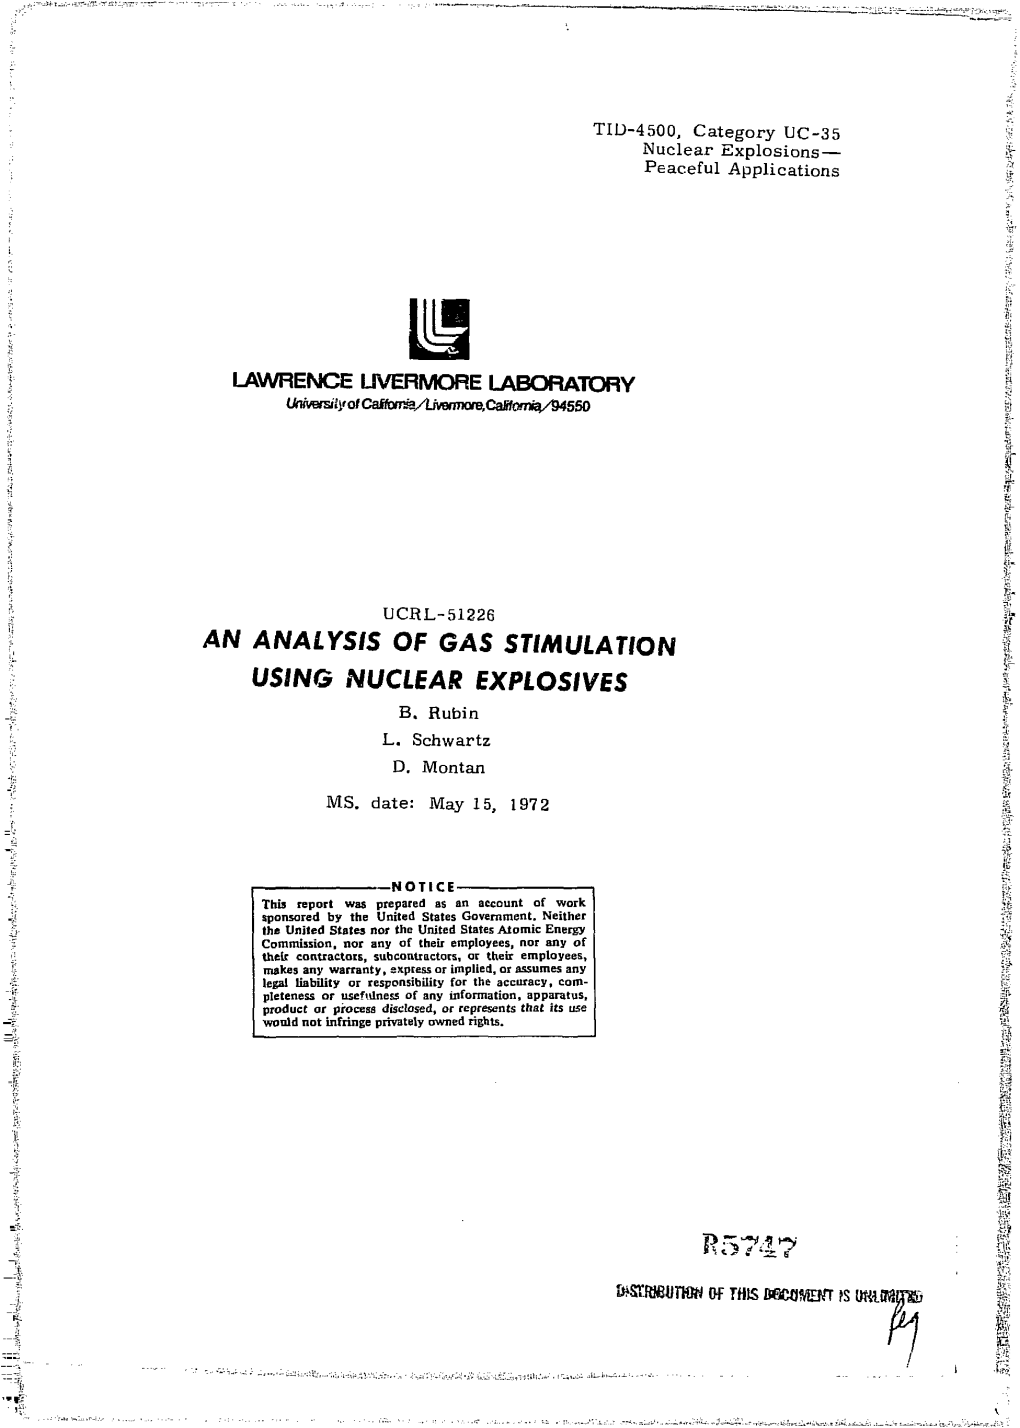 An Analysis of Gas Stimulation Using Nuclear Explosives B